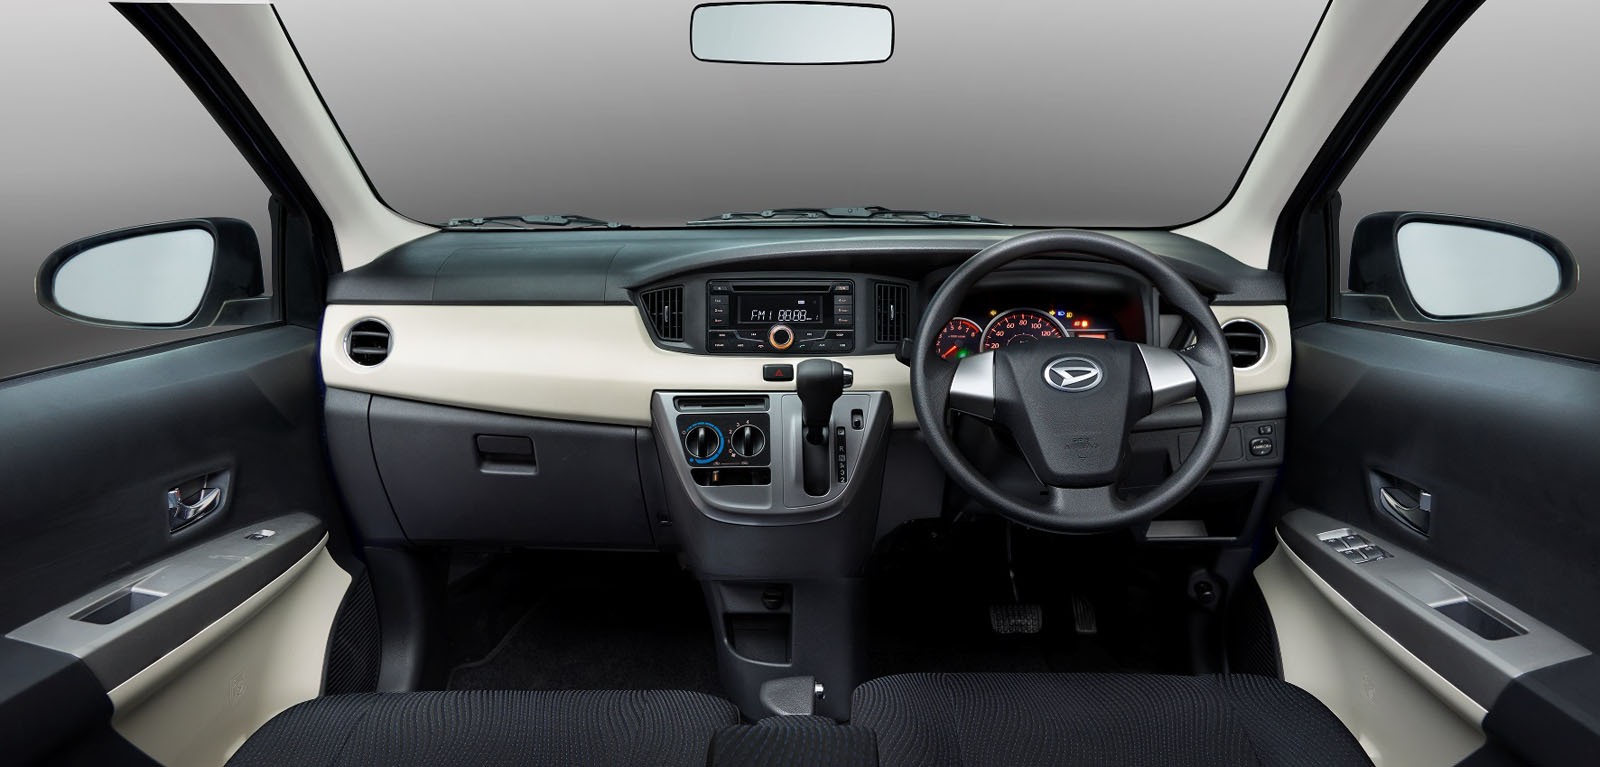 Daihatsu Rolls Out New Budget And Family Friendly Sigra  